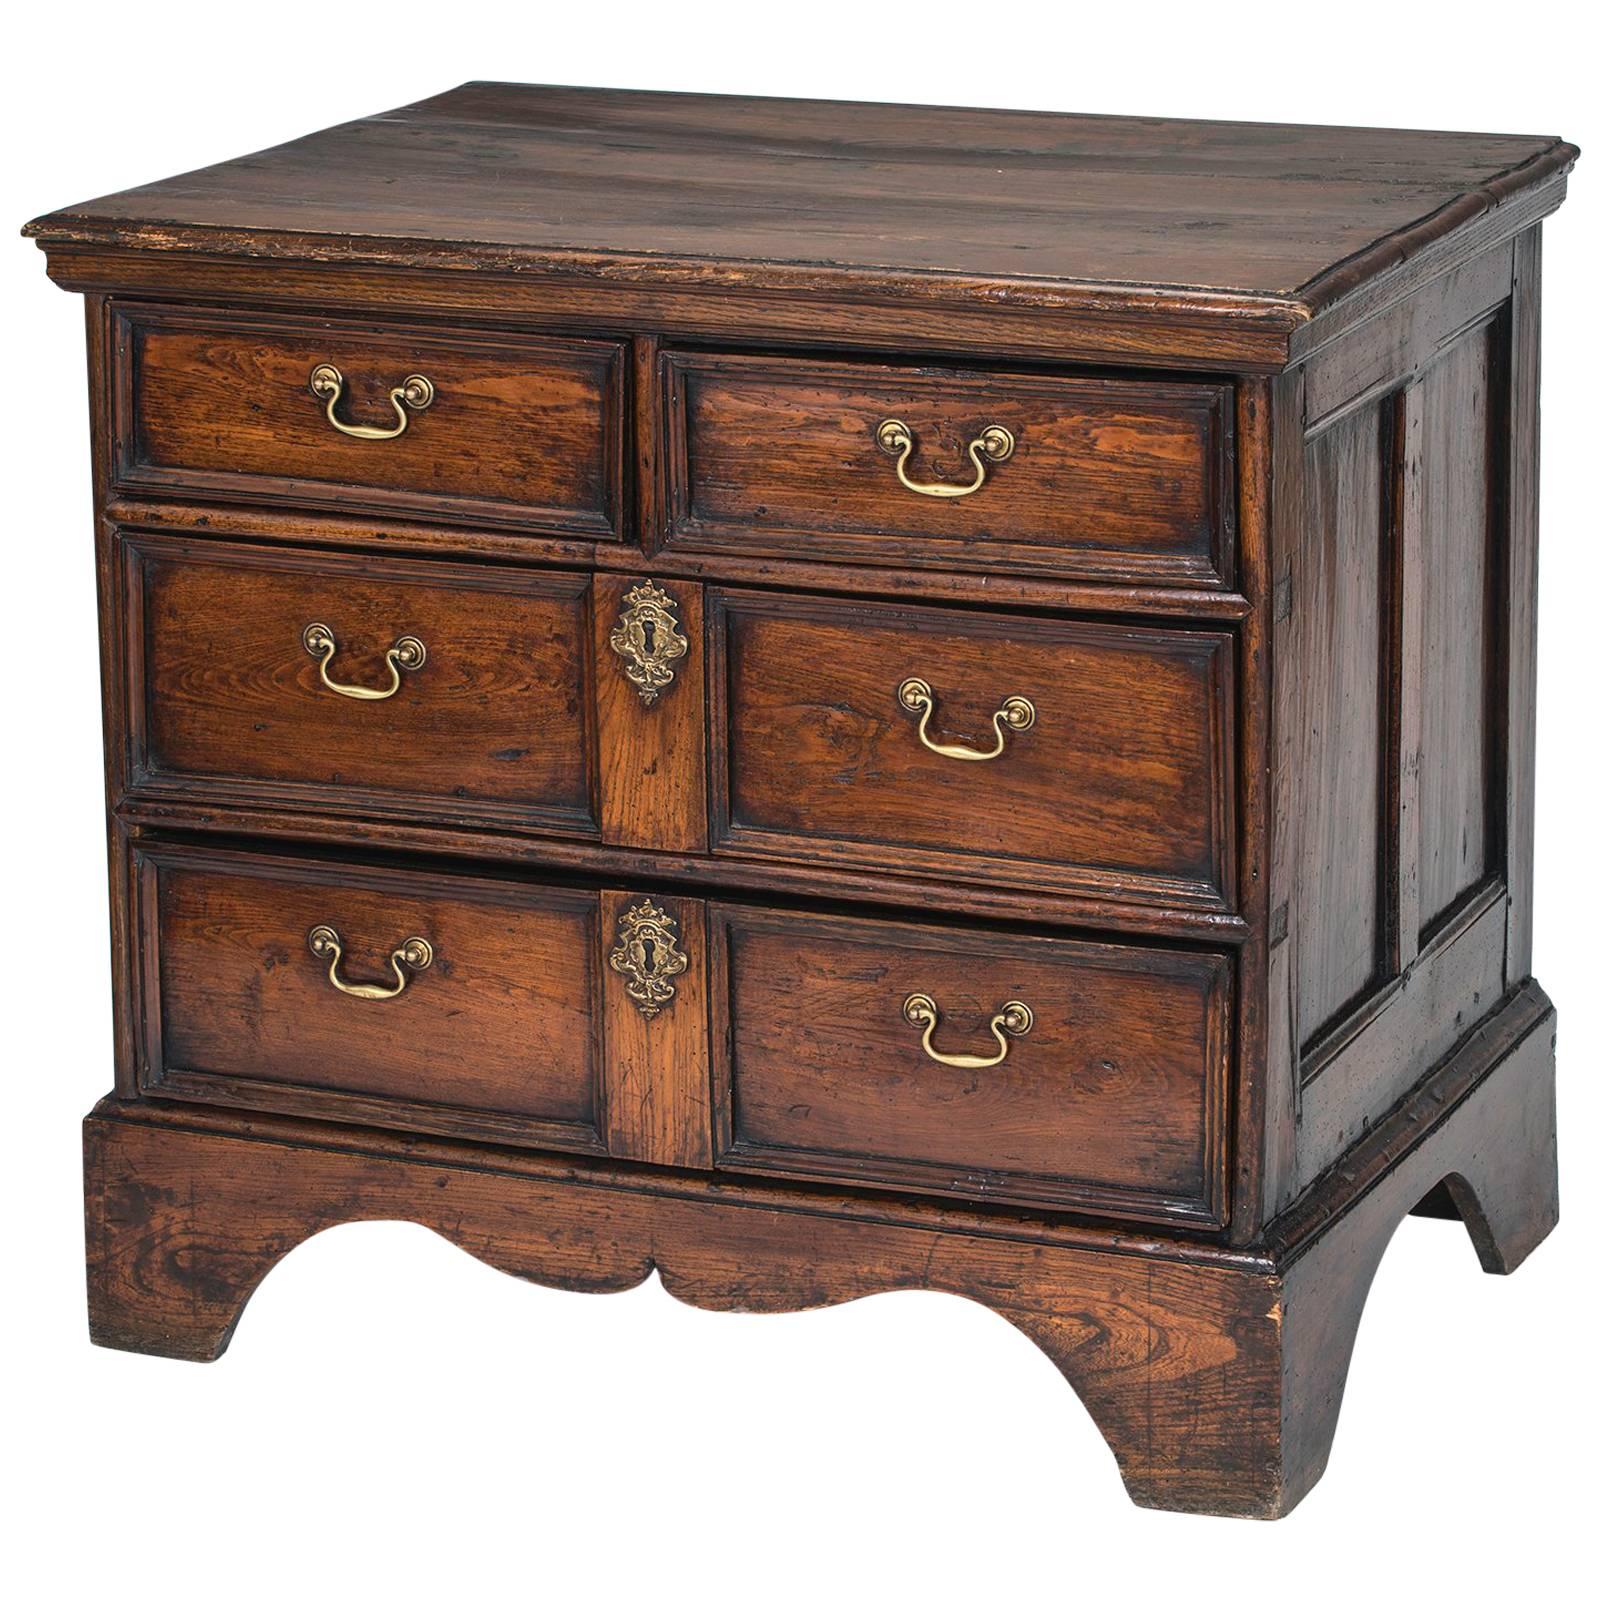 English commode with four drawers, circa 1880s. Warm English oak, panel sides, dressed with brass hardware handles. A simple practical serving chest.  Great for sink commode cabinet.